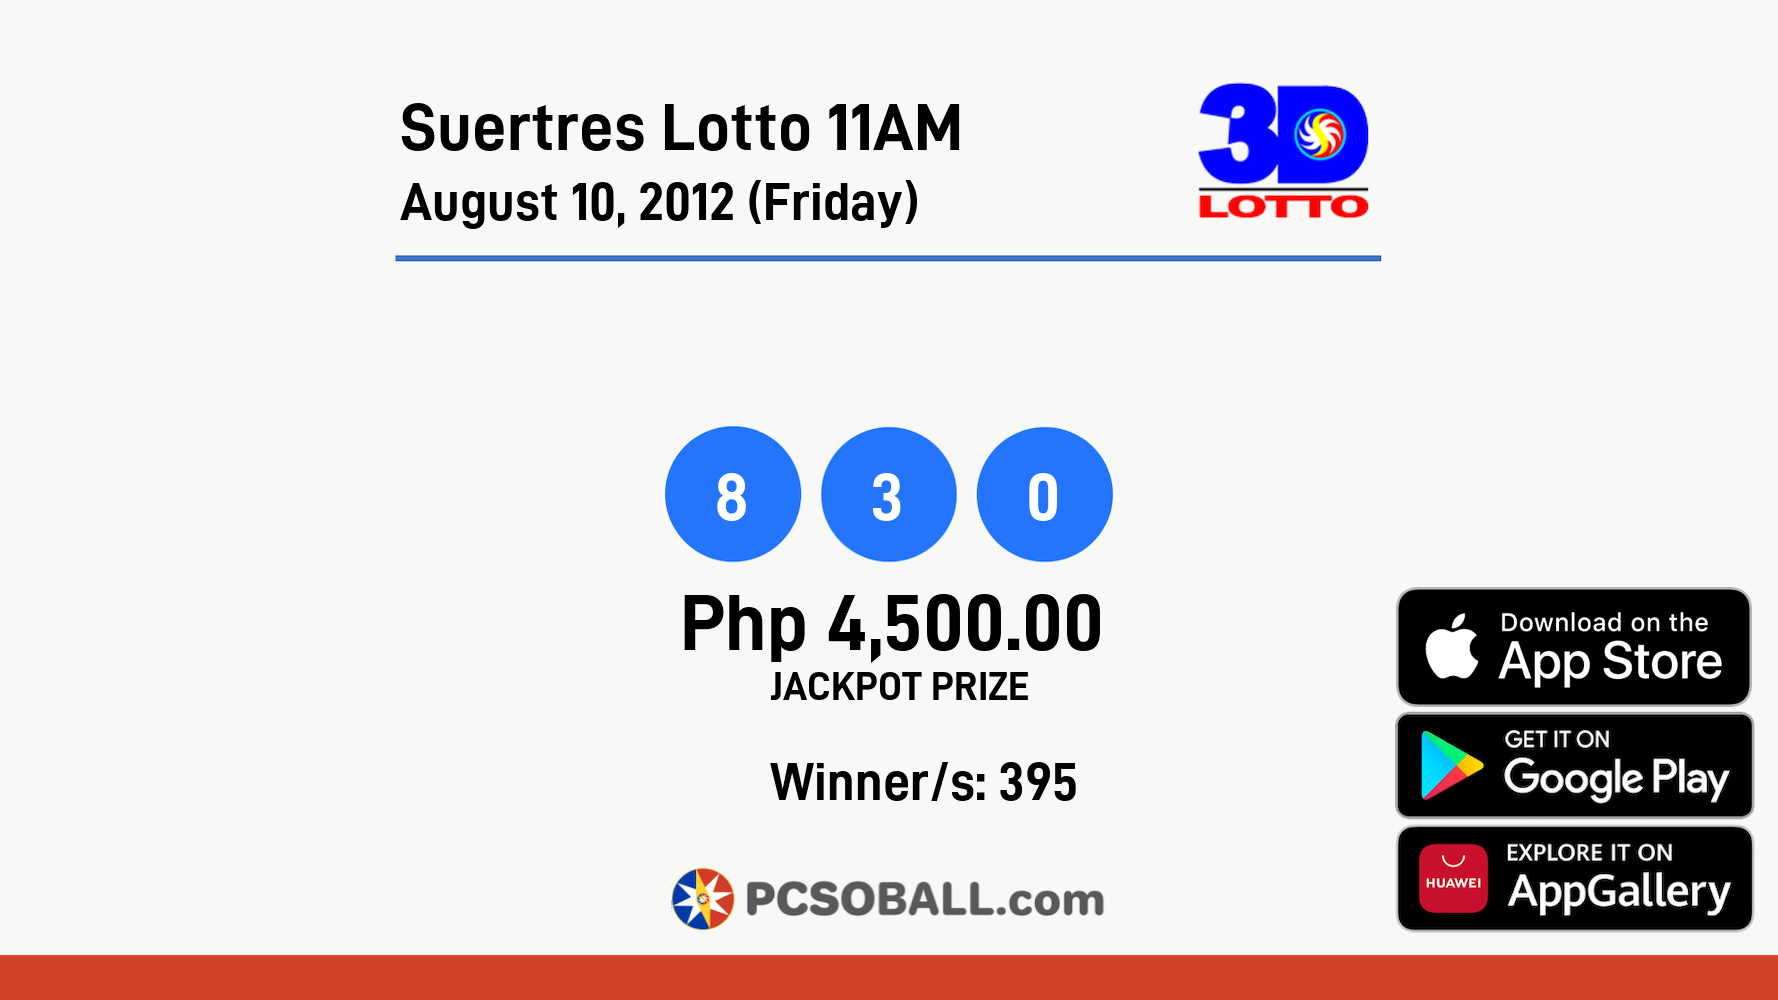 Suertres Lotto 11AM August 10, 2012 (Friday) Result